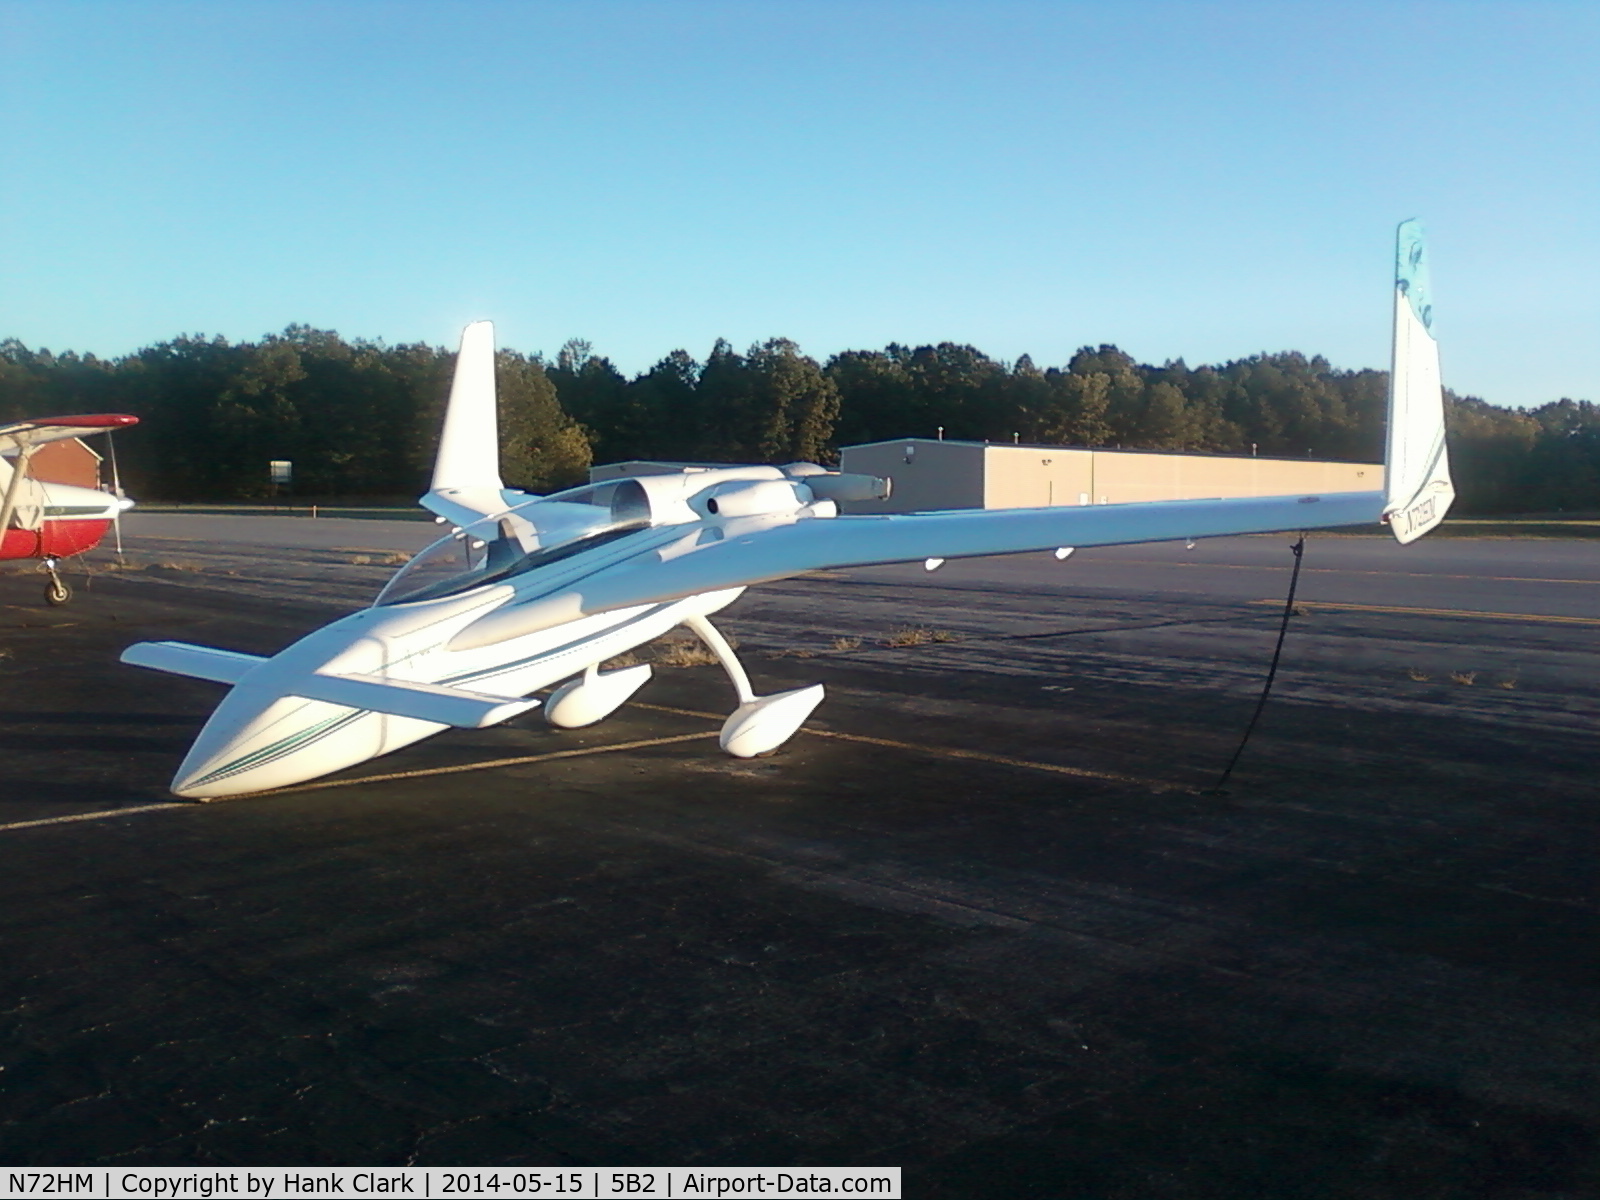 N72HM, Rutan Long-EZ C/N 72, Parked on her nose...  A small price to pay for 140 mph cruise burning 5.0 gal/hr.